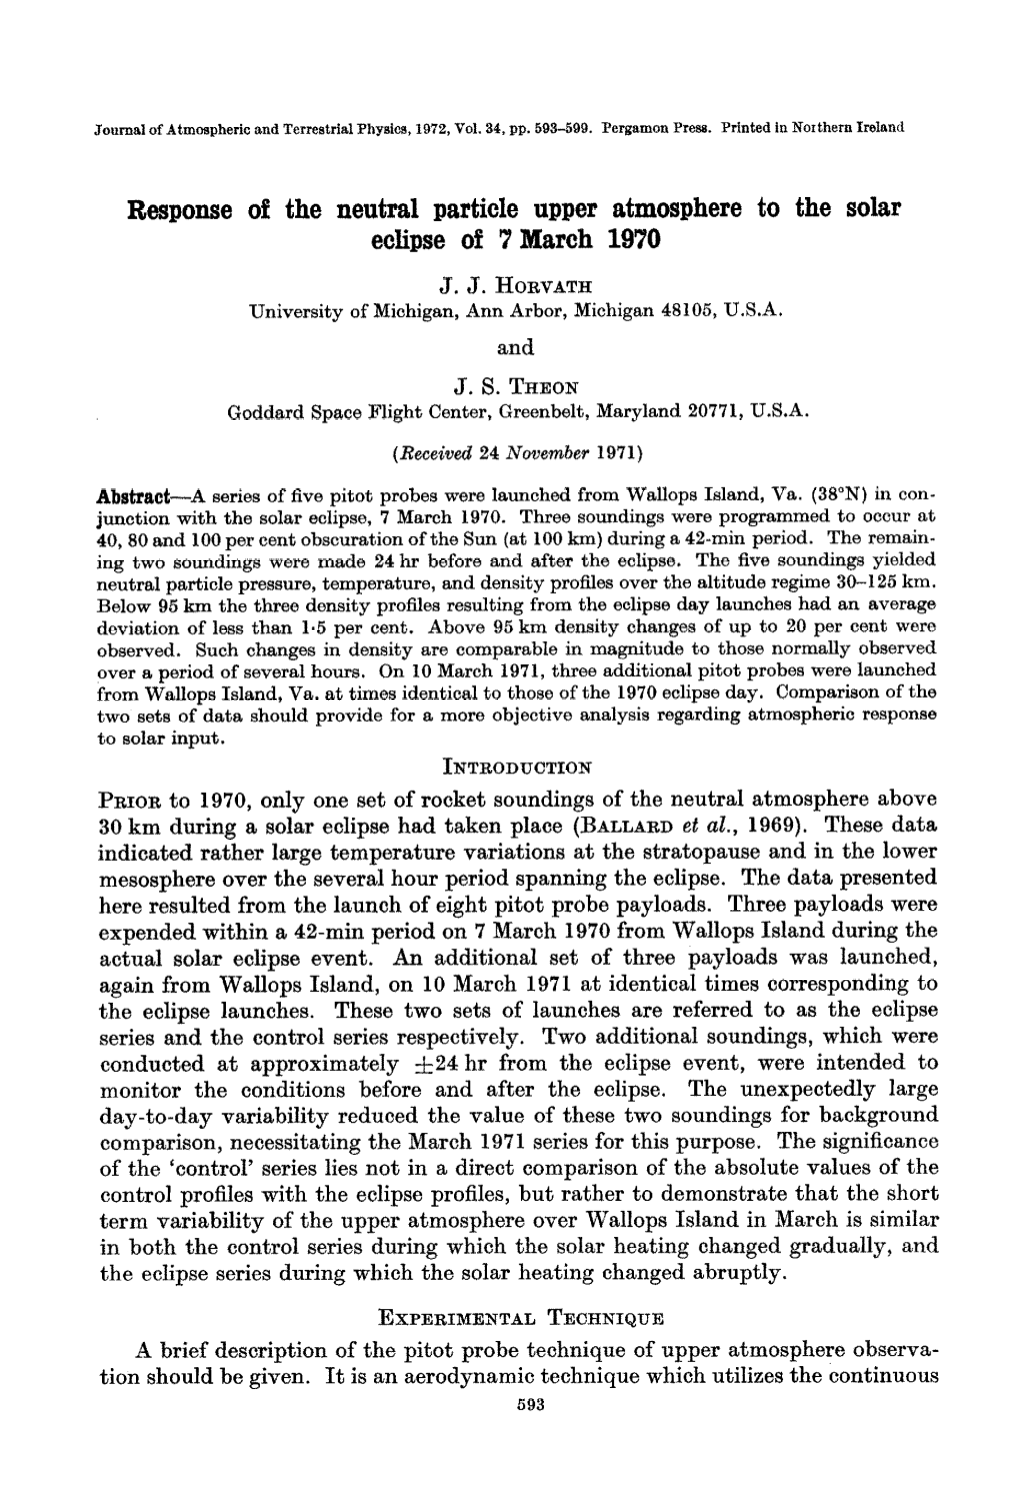 Response of the Neutral Particle Upper Atmosphere to the Solar Eclipse of 7 Lkarch 1970